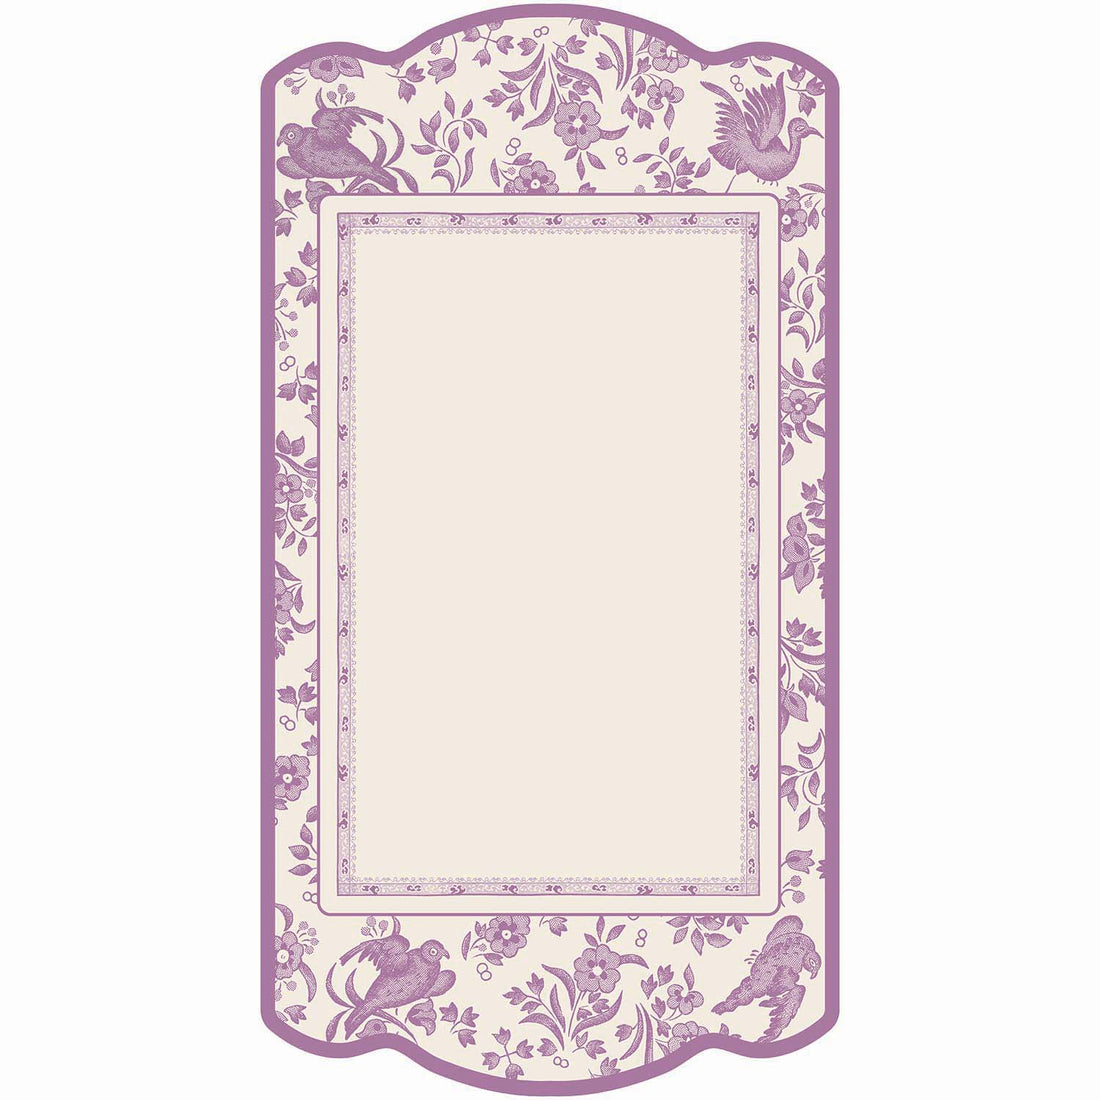 A die-cut rectangular card framed by a lilac purple vintage Burleigh-style design of birds, flowers and filagree. The center is a blank white rectangle for personalization.